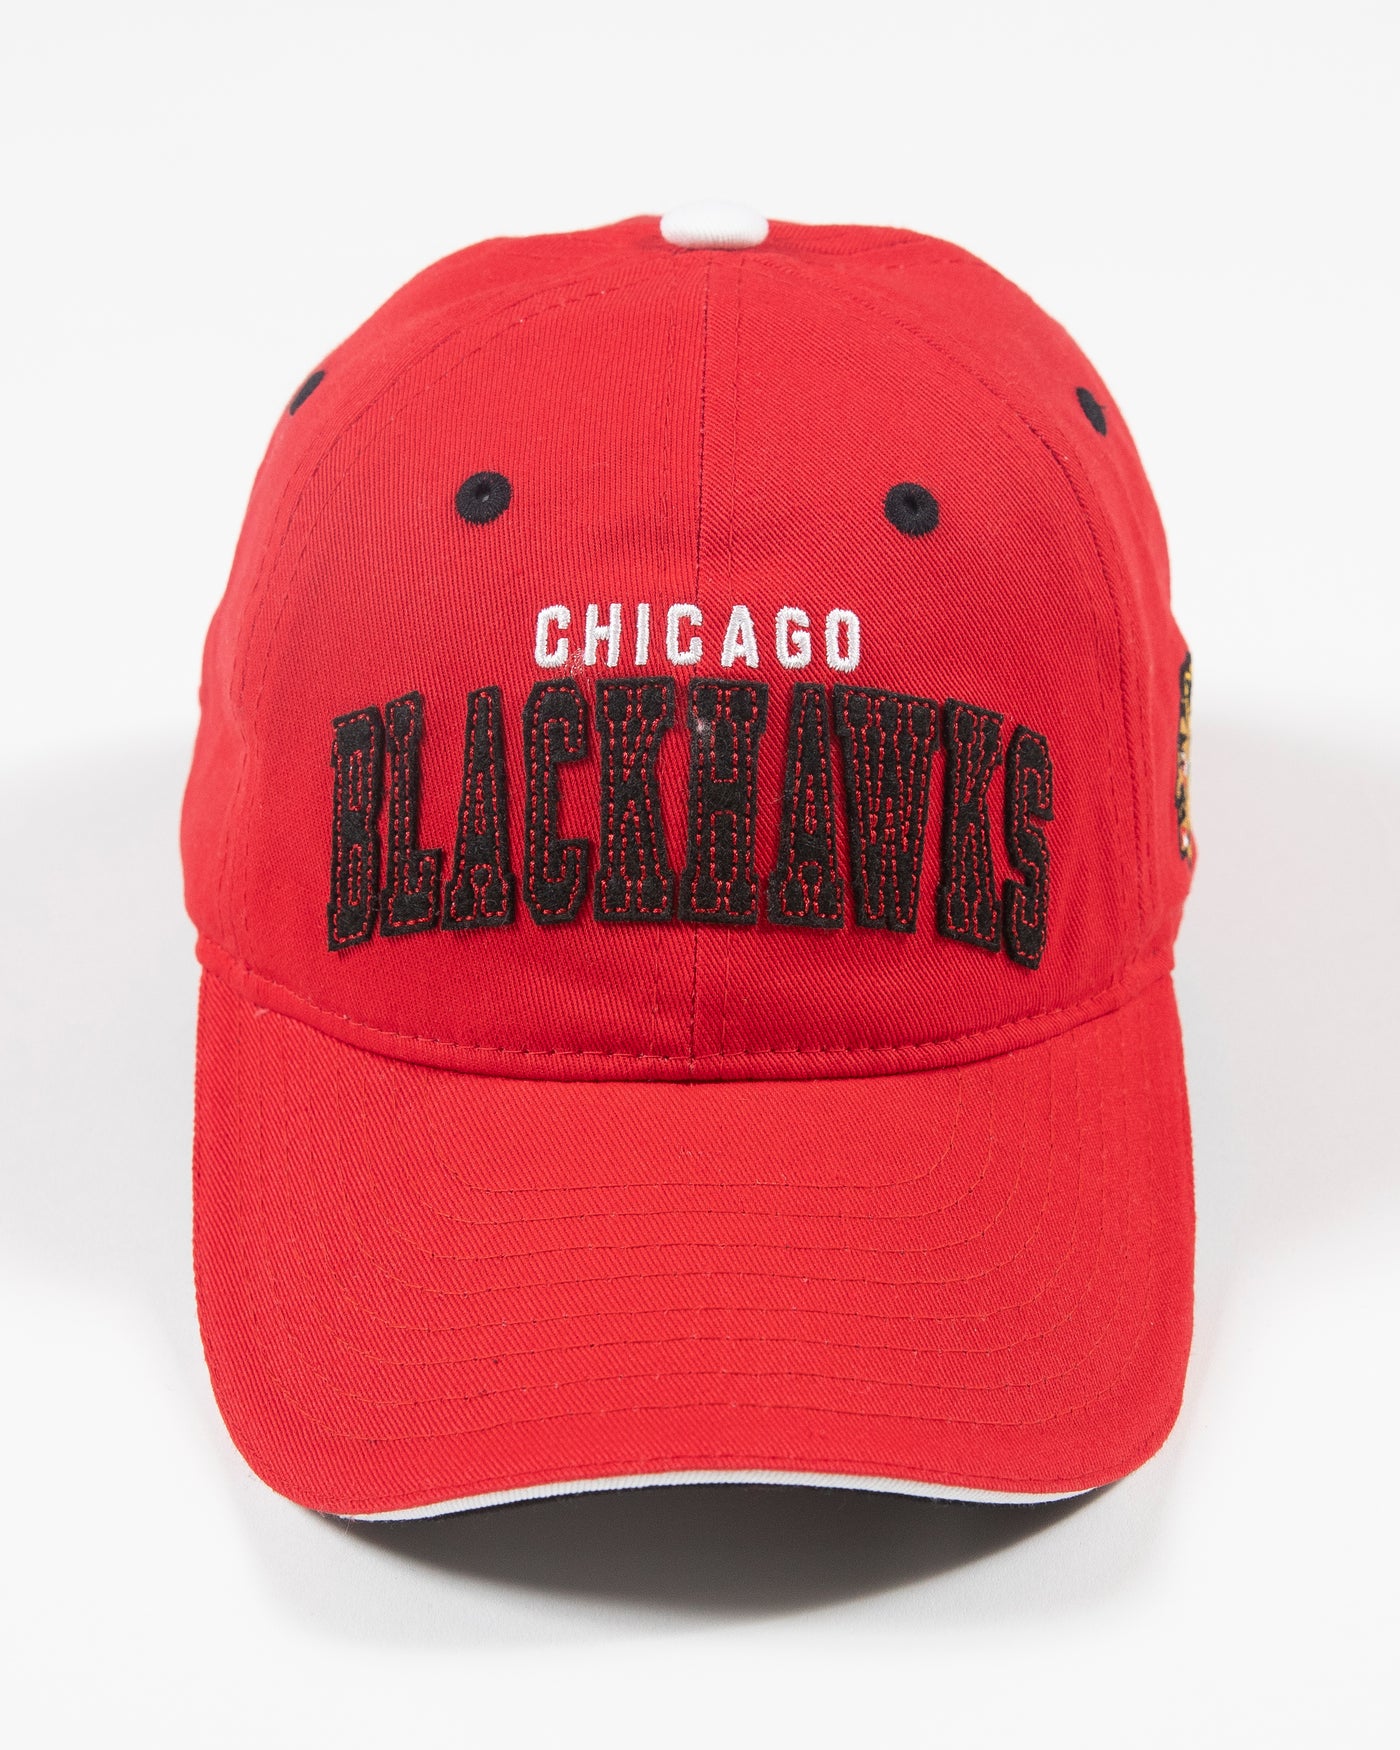 red Outerstuff Chicago Blackhawks adjustable youth cap - front lay flat